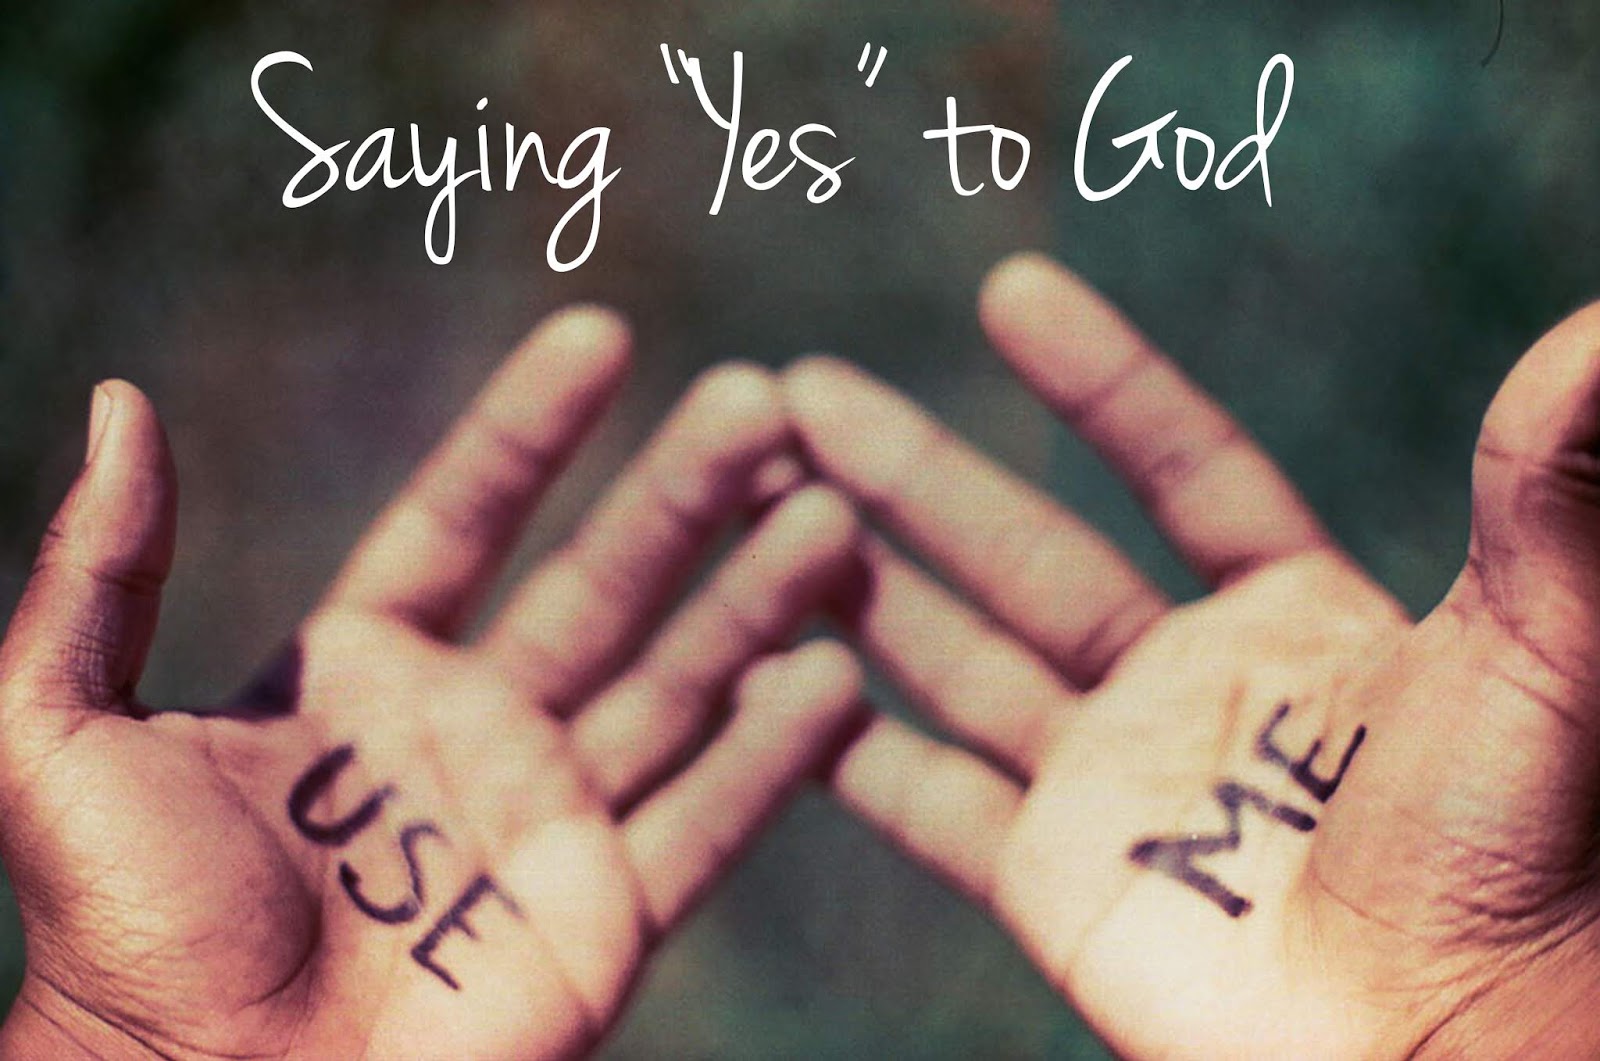 Sermon, "Saying Yes to God: Yes and No," Matthew 21:28-32